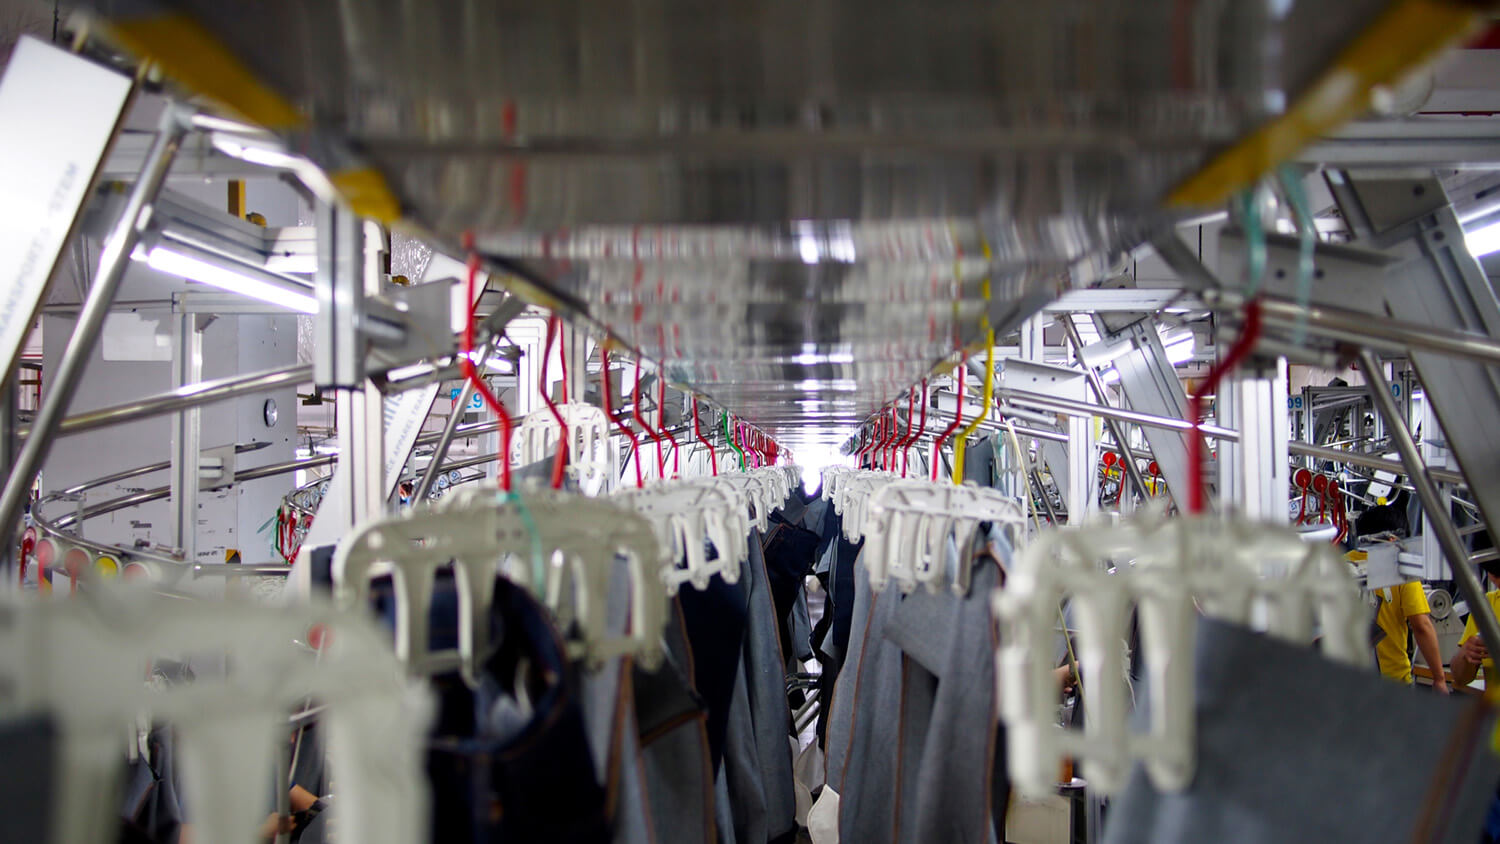 Jeans being manufactured